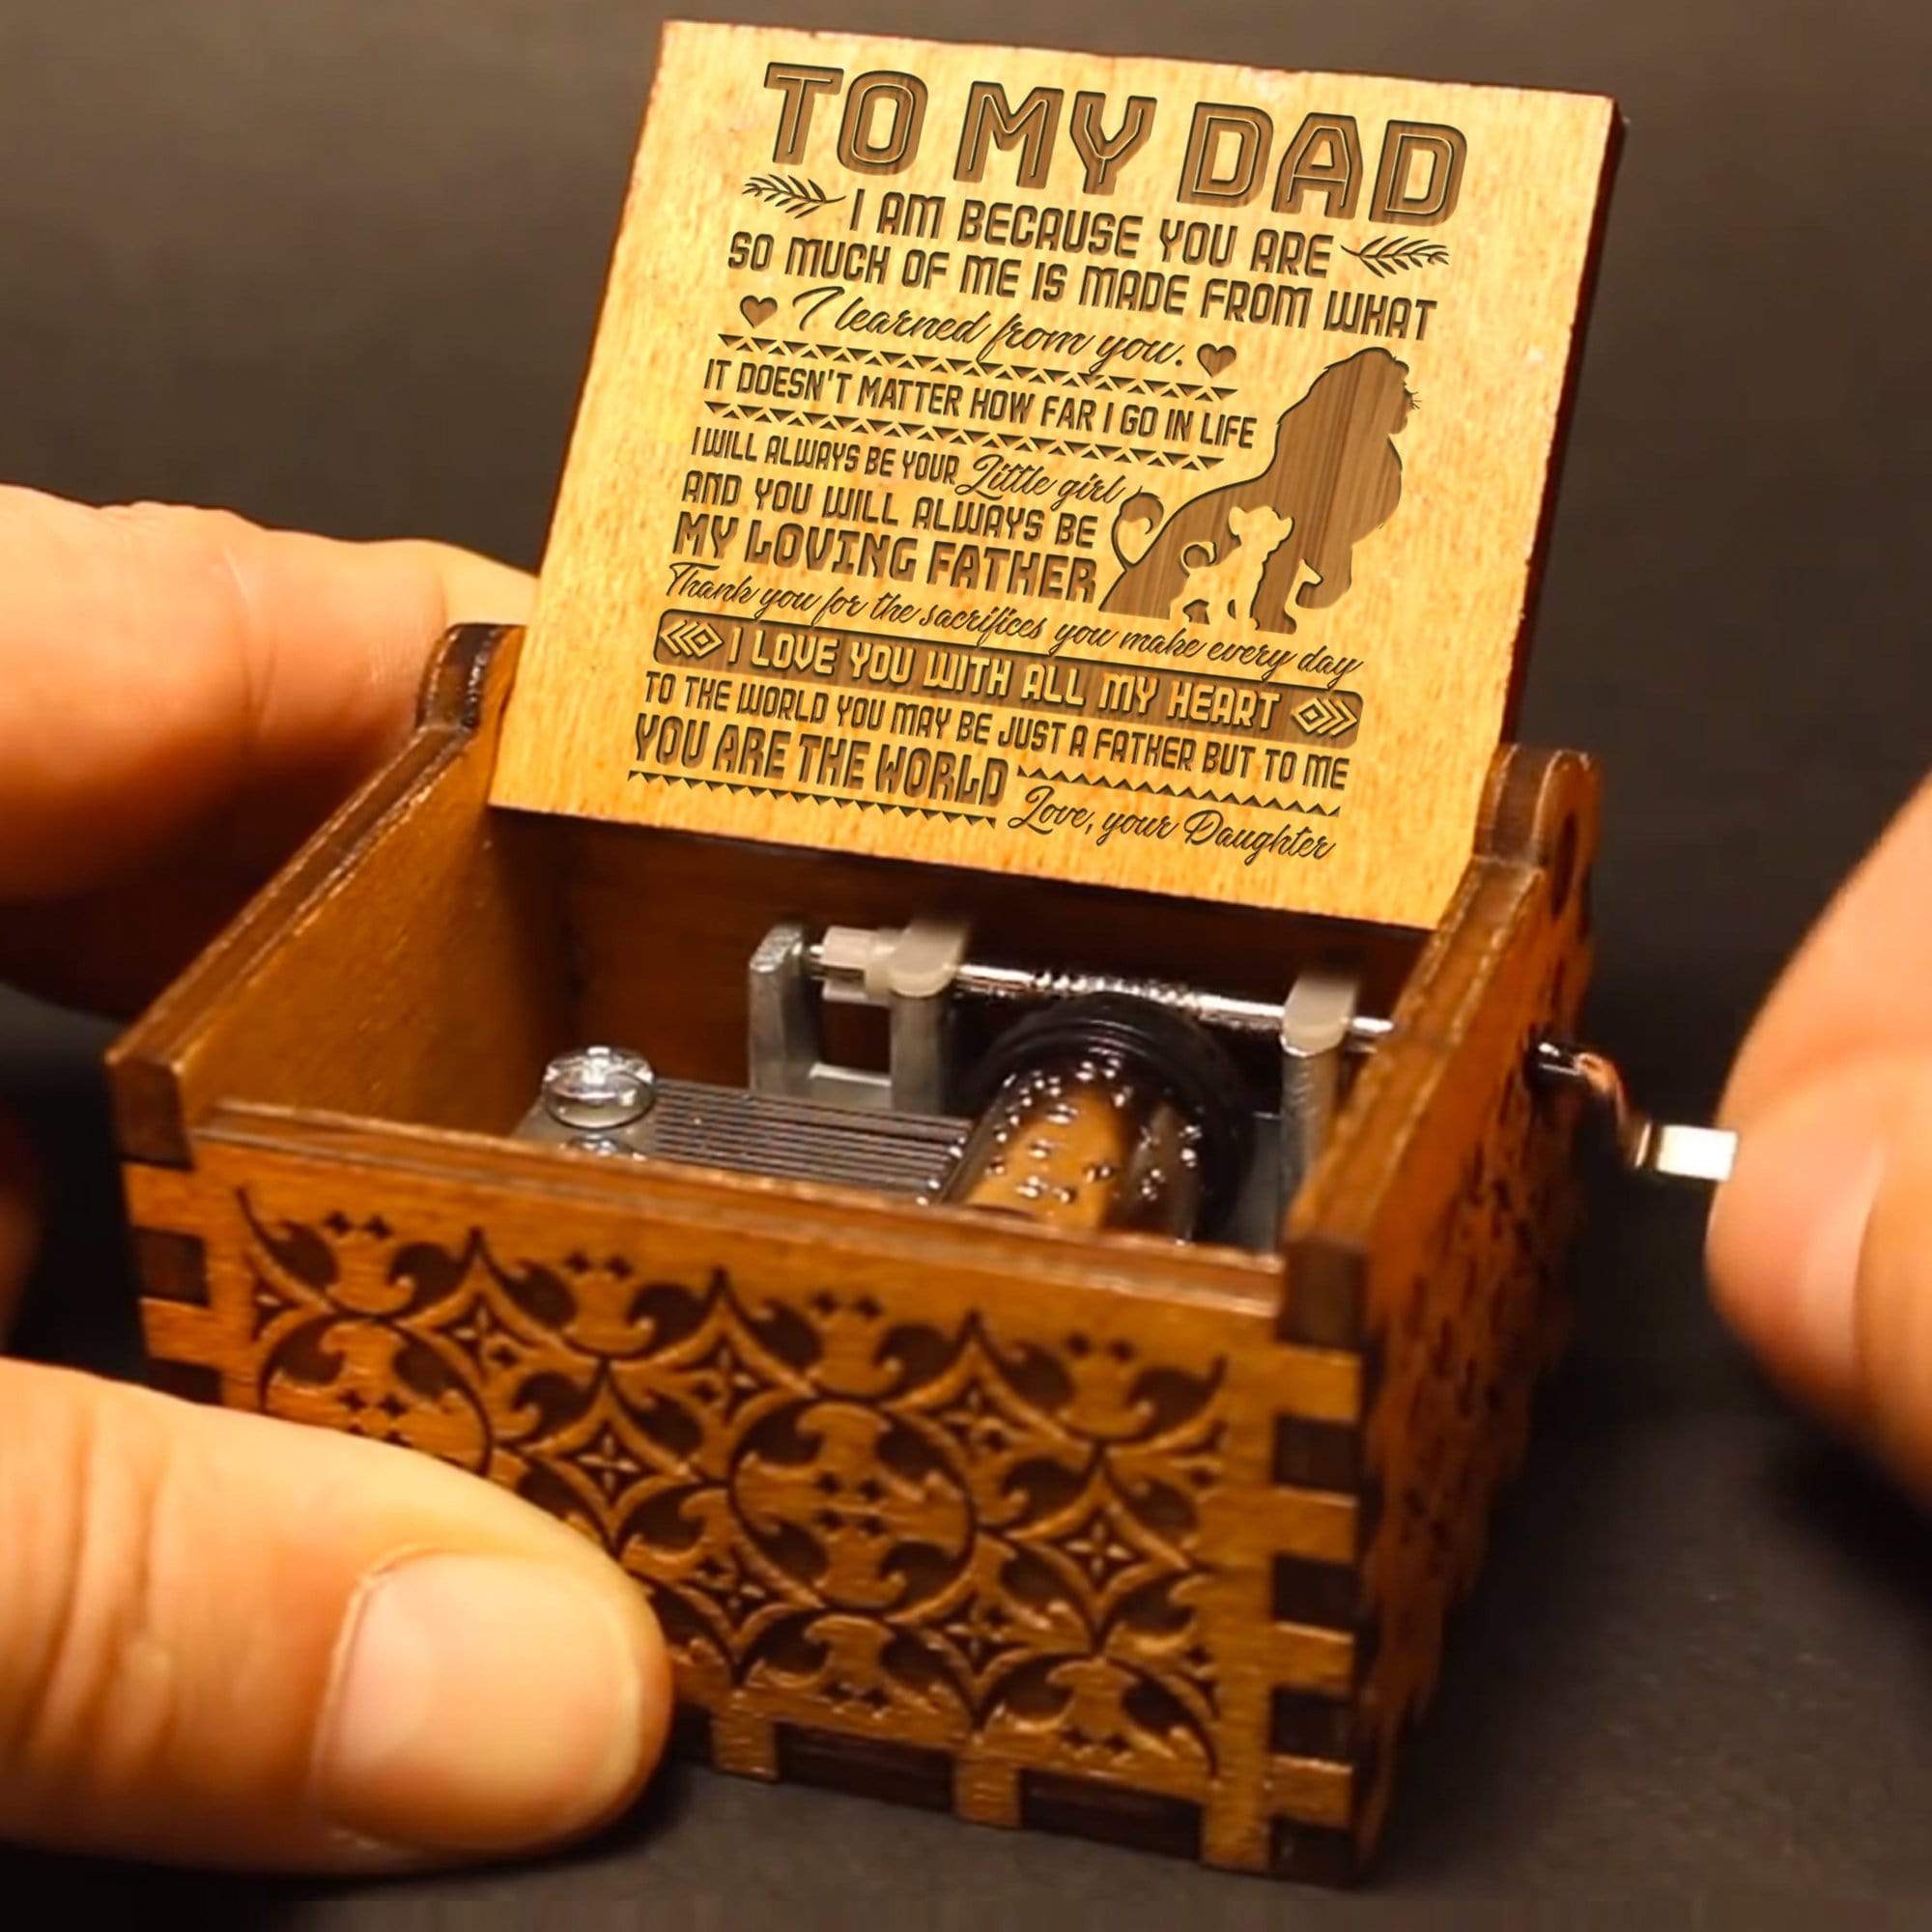 dad and daughter music box